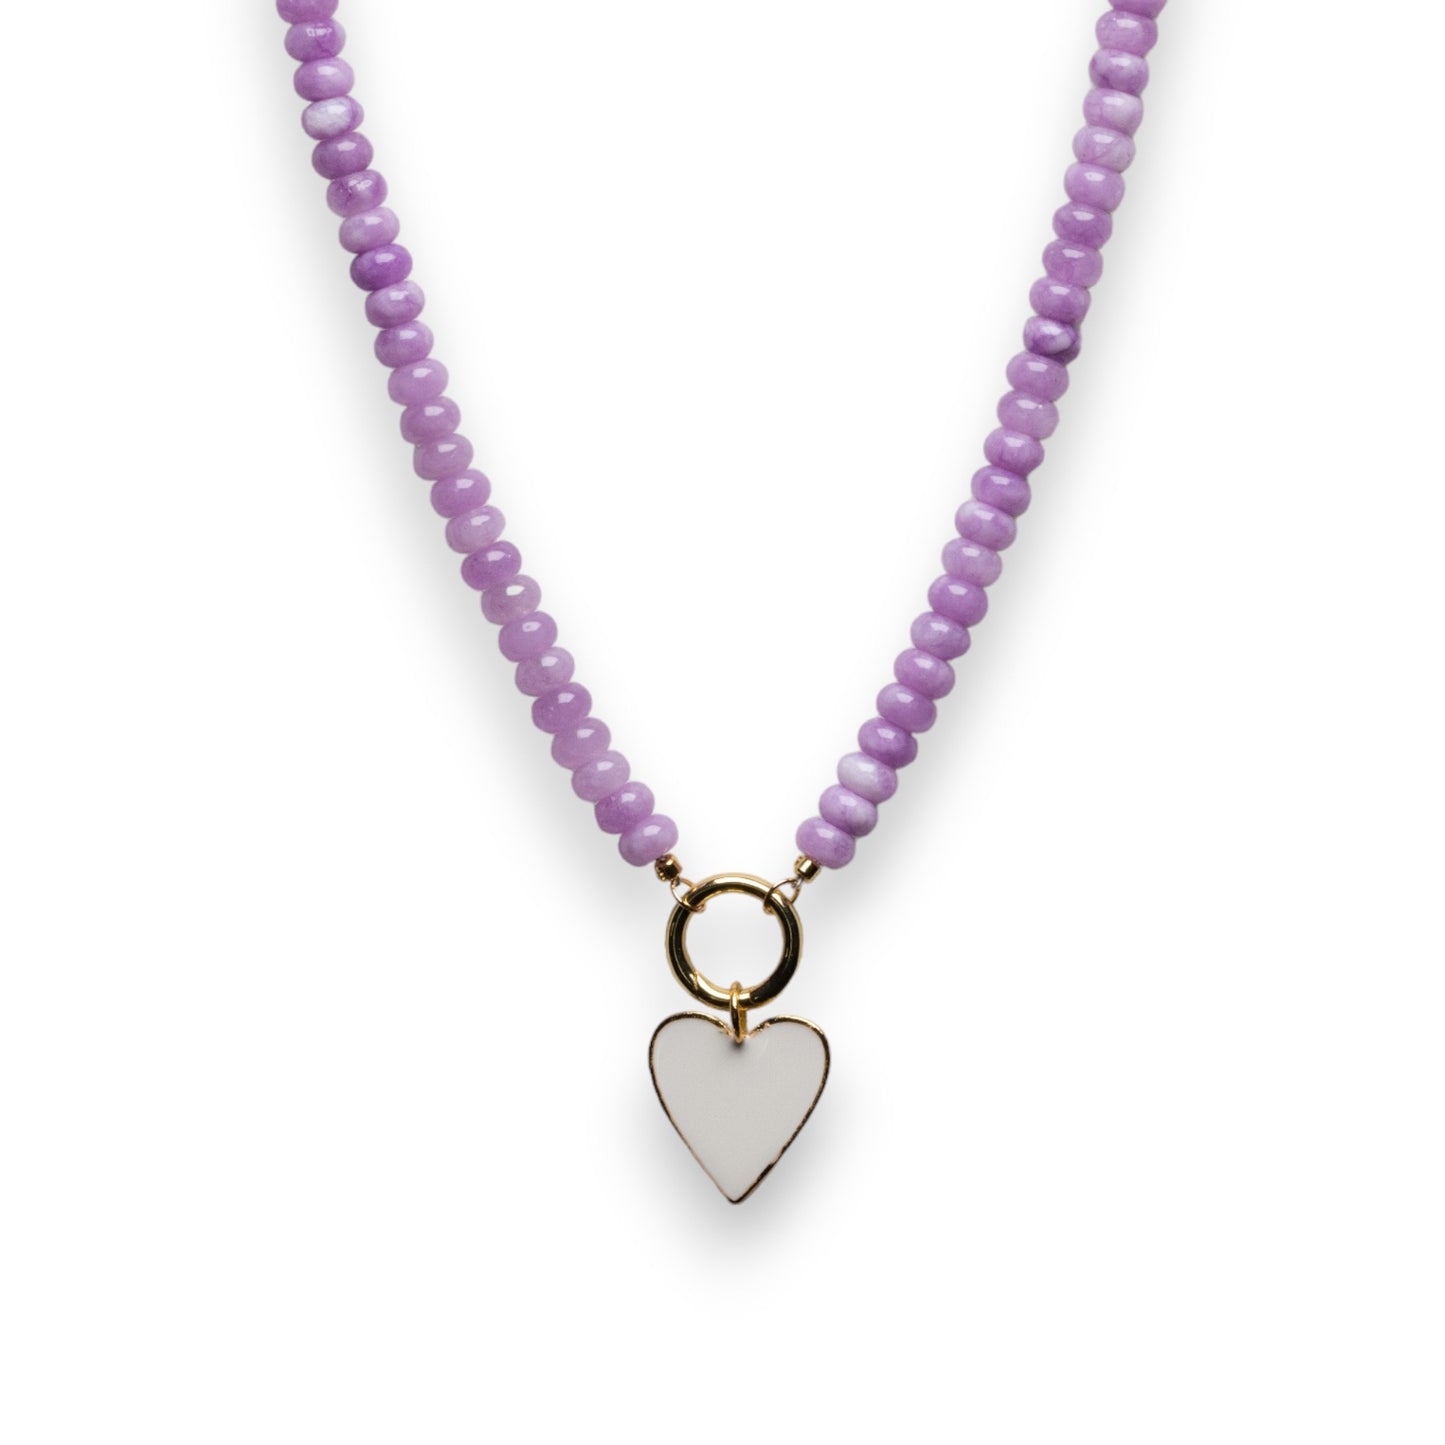 Wisteria Rondelle Bead Necklace with White Heart Charm